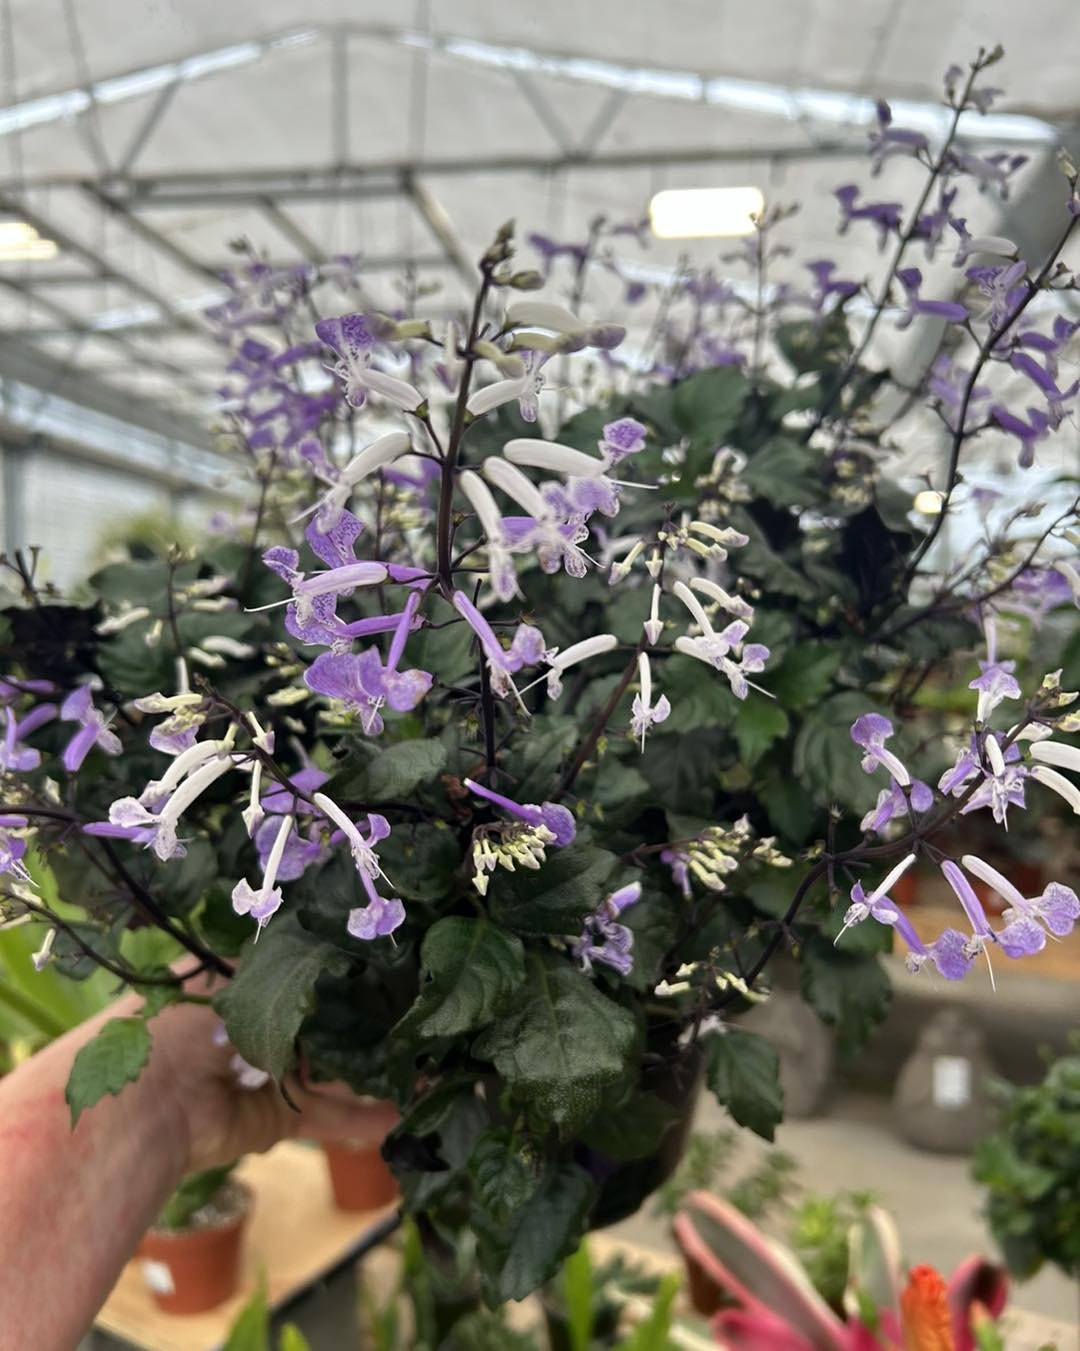 💜Meet Mona, Mona Lavender!

🪴This beauty can be grown as a shade annual in our area. Give it a nice spot with morning sun, and she&rsquo;ll reward you will beautiful purple blooms. 

🏡Once the season winds down, try overwintering her as a housepla